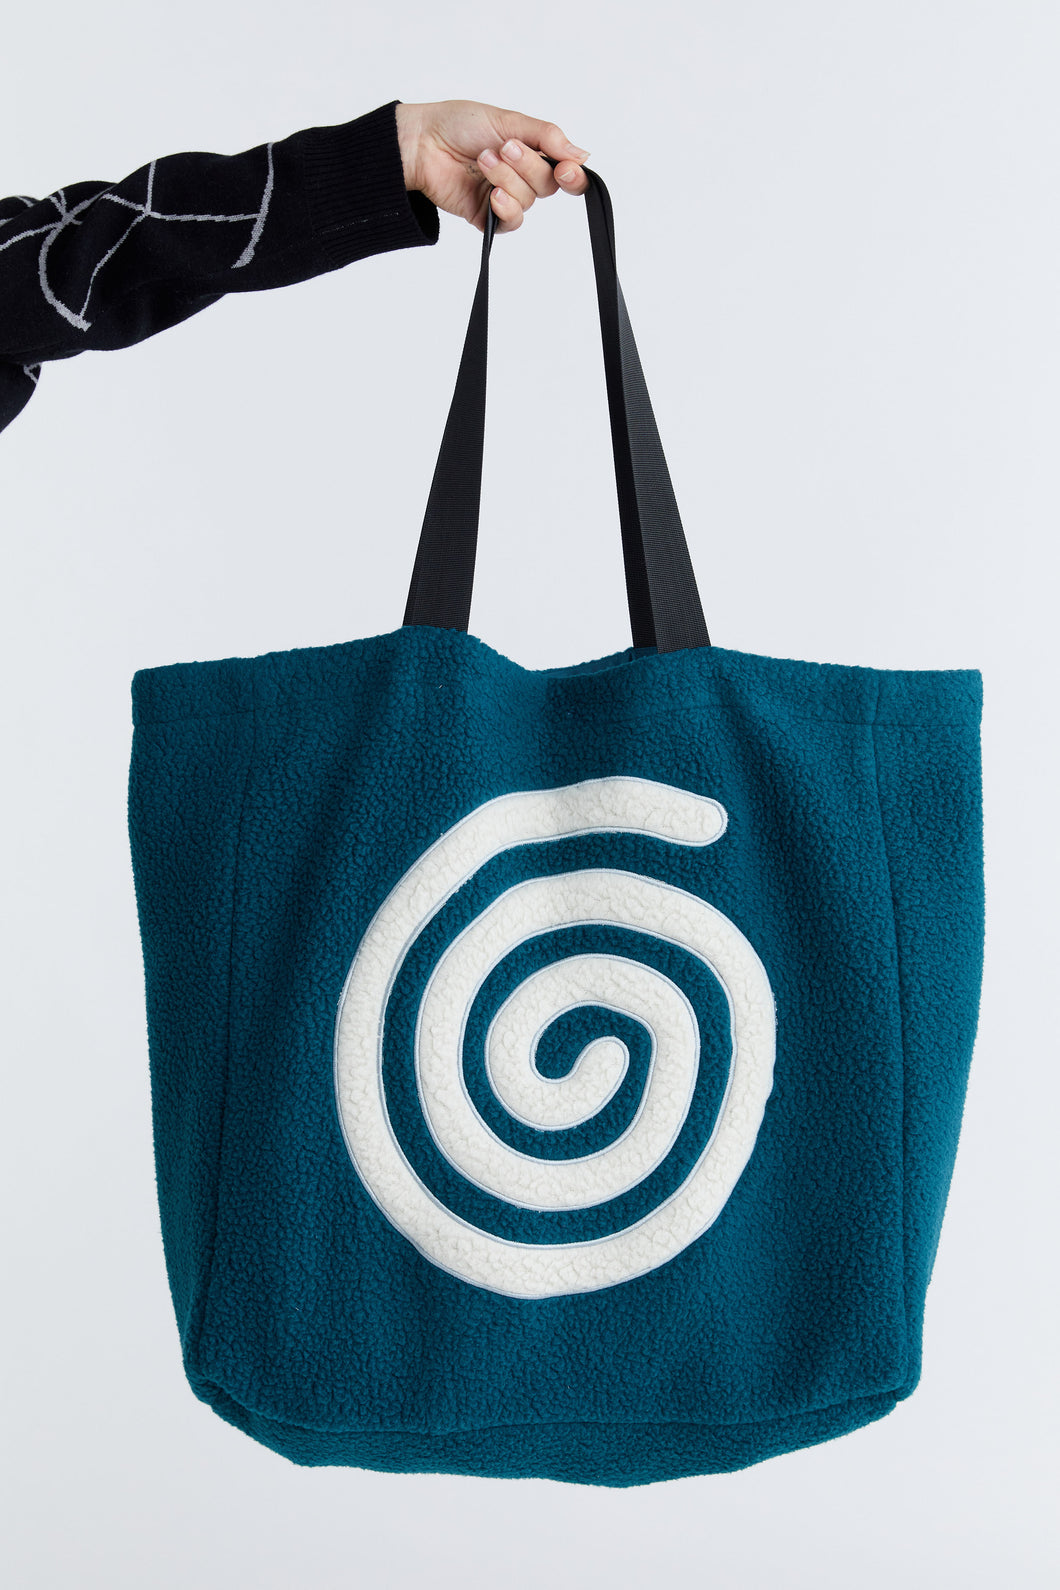 RECYCLED SHEARLING SPIRAL BAG - NORTH SEA GARDEN